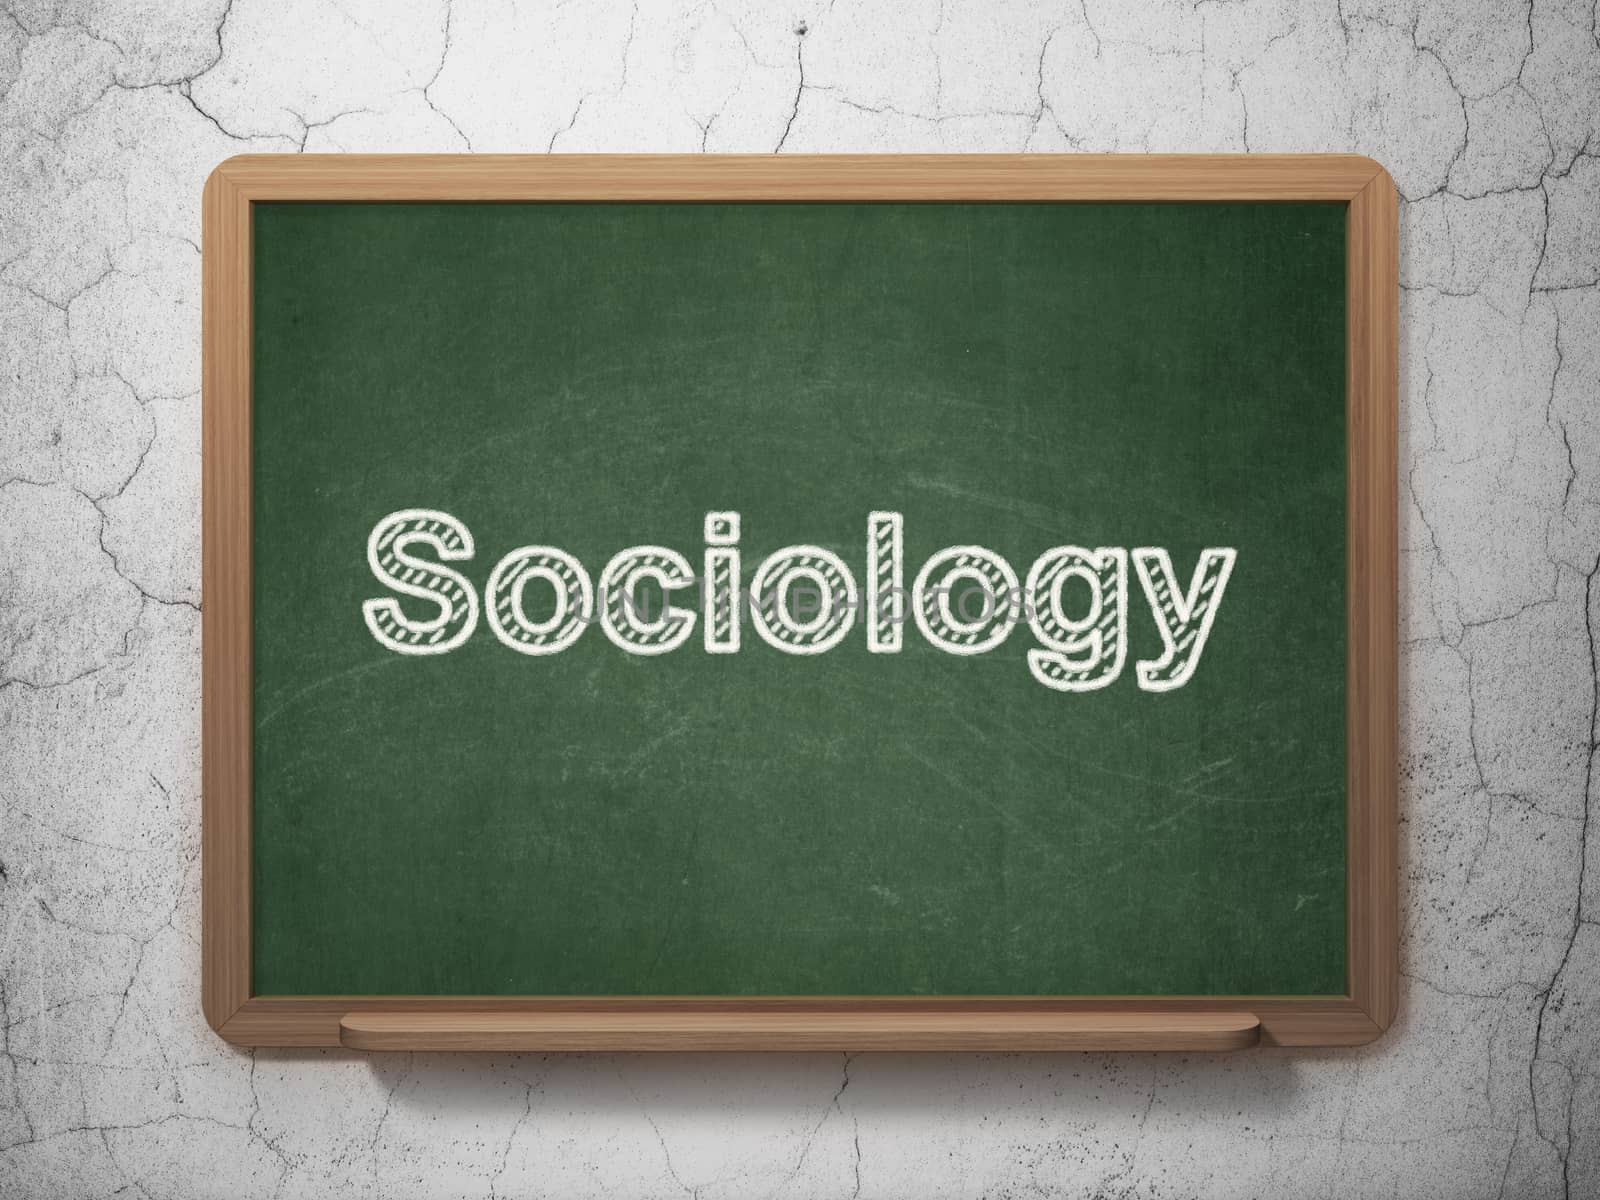 Studying concept: text Sociology on Green chalkboard on grunge wall background, 3D rendering